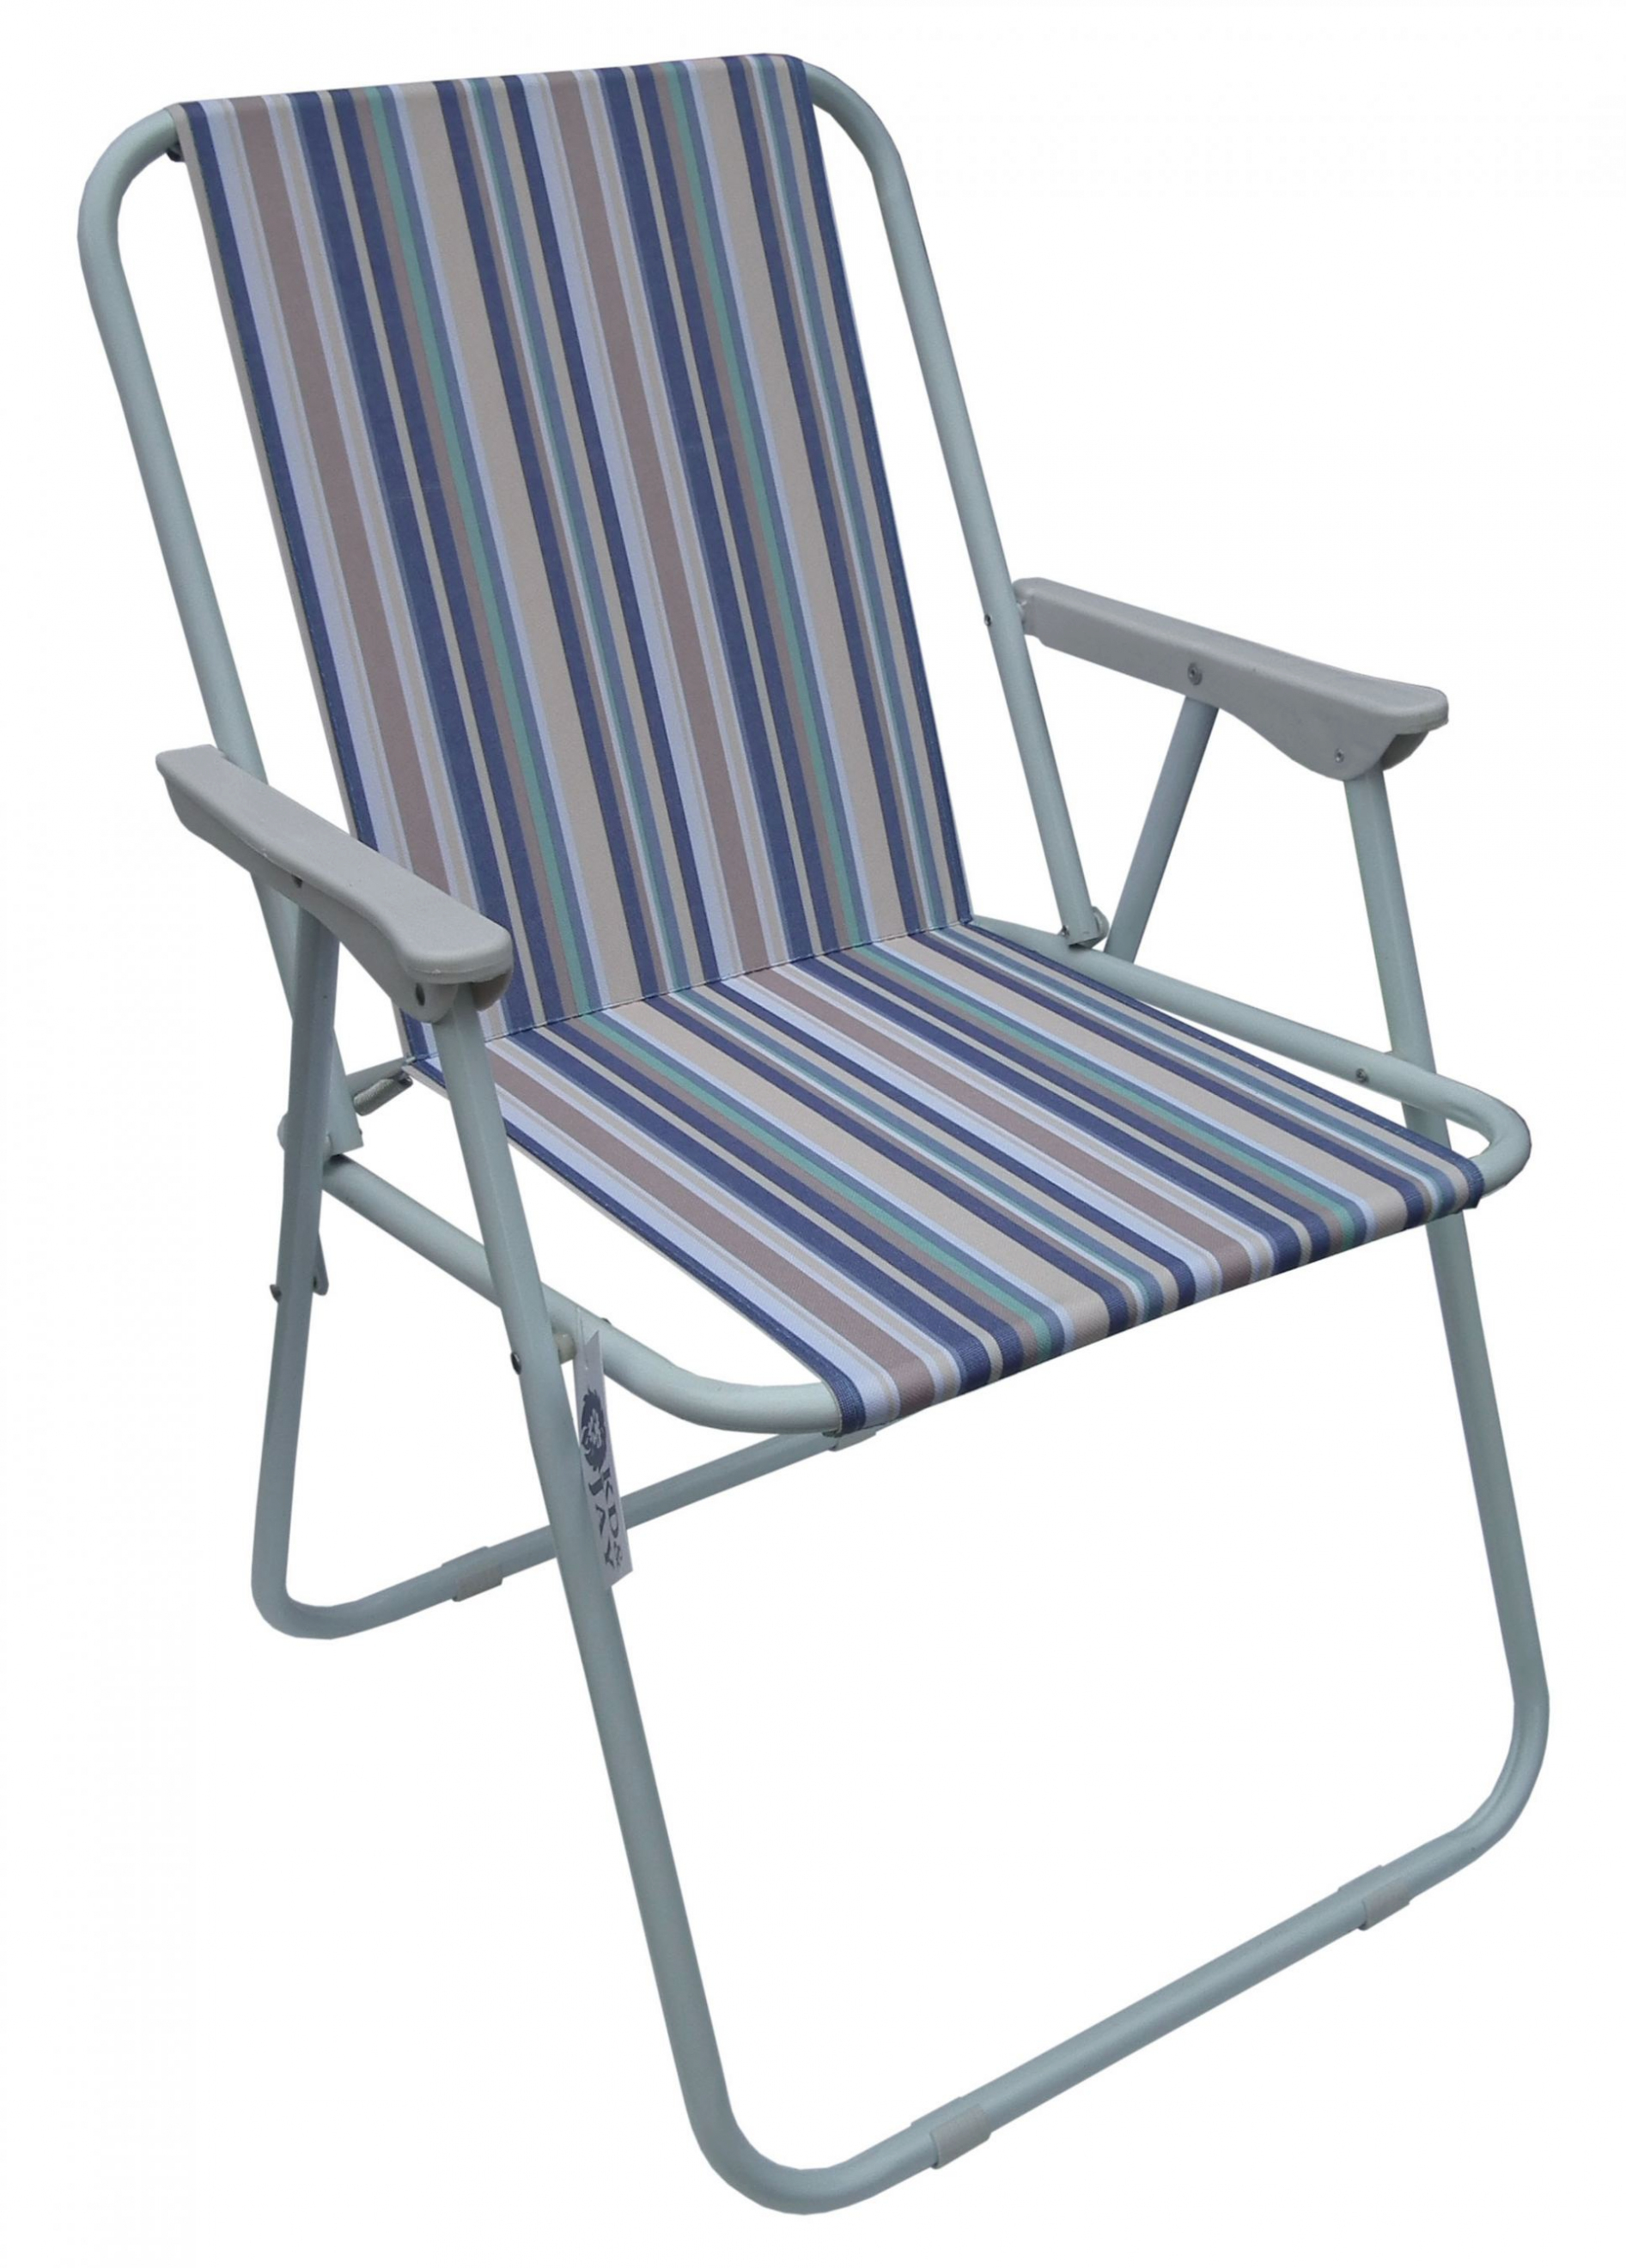 Lovely Low Profile Lawn Chairs Old School Amazon Com Stansport Fold ...